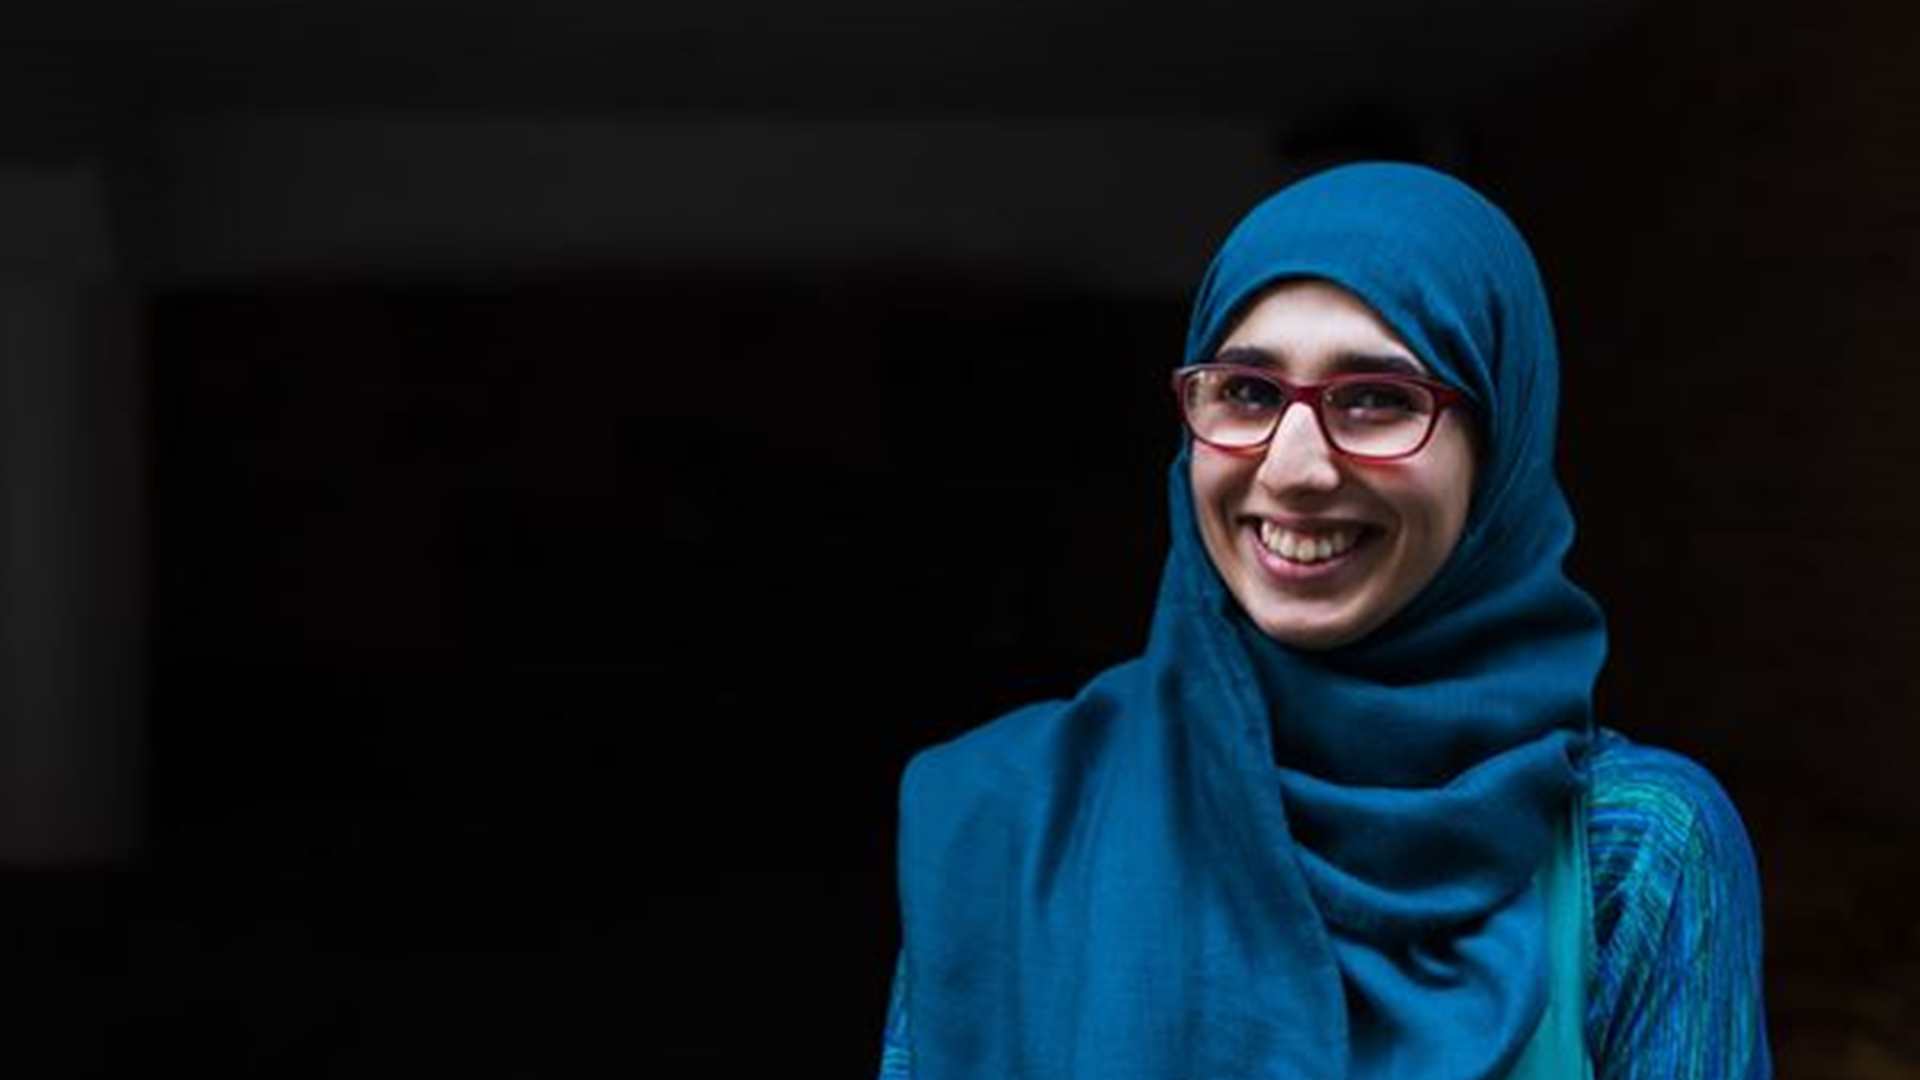 A young woman wearing a blue hijab and glasses smiling.